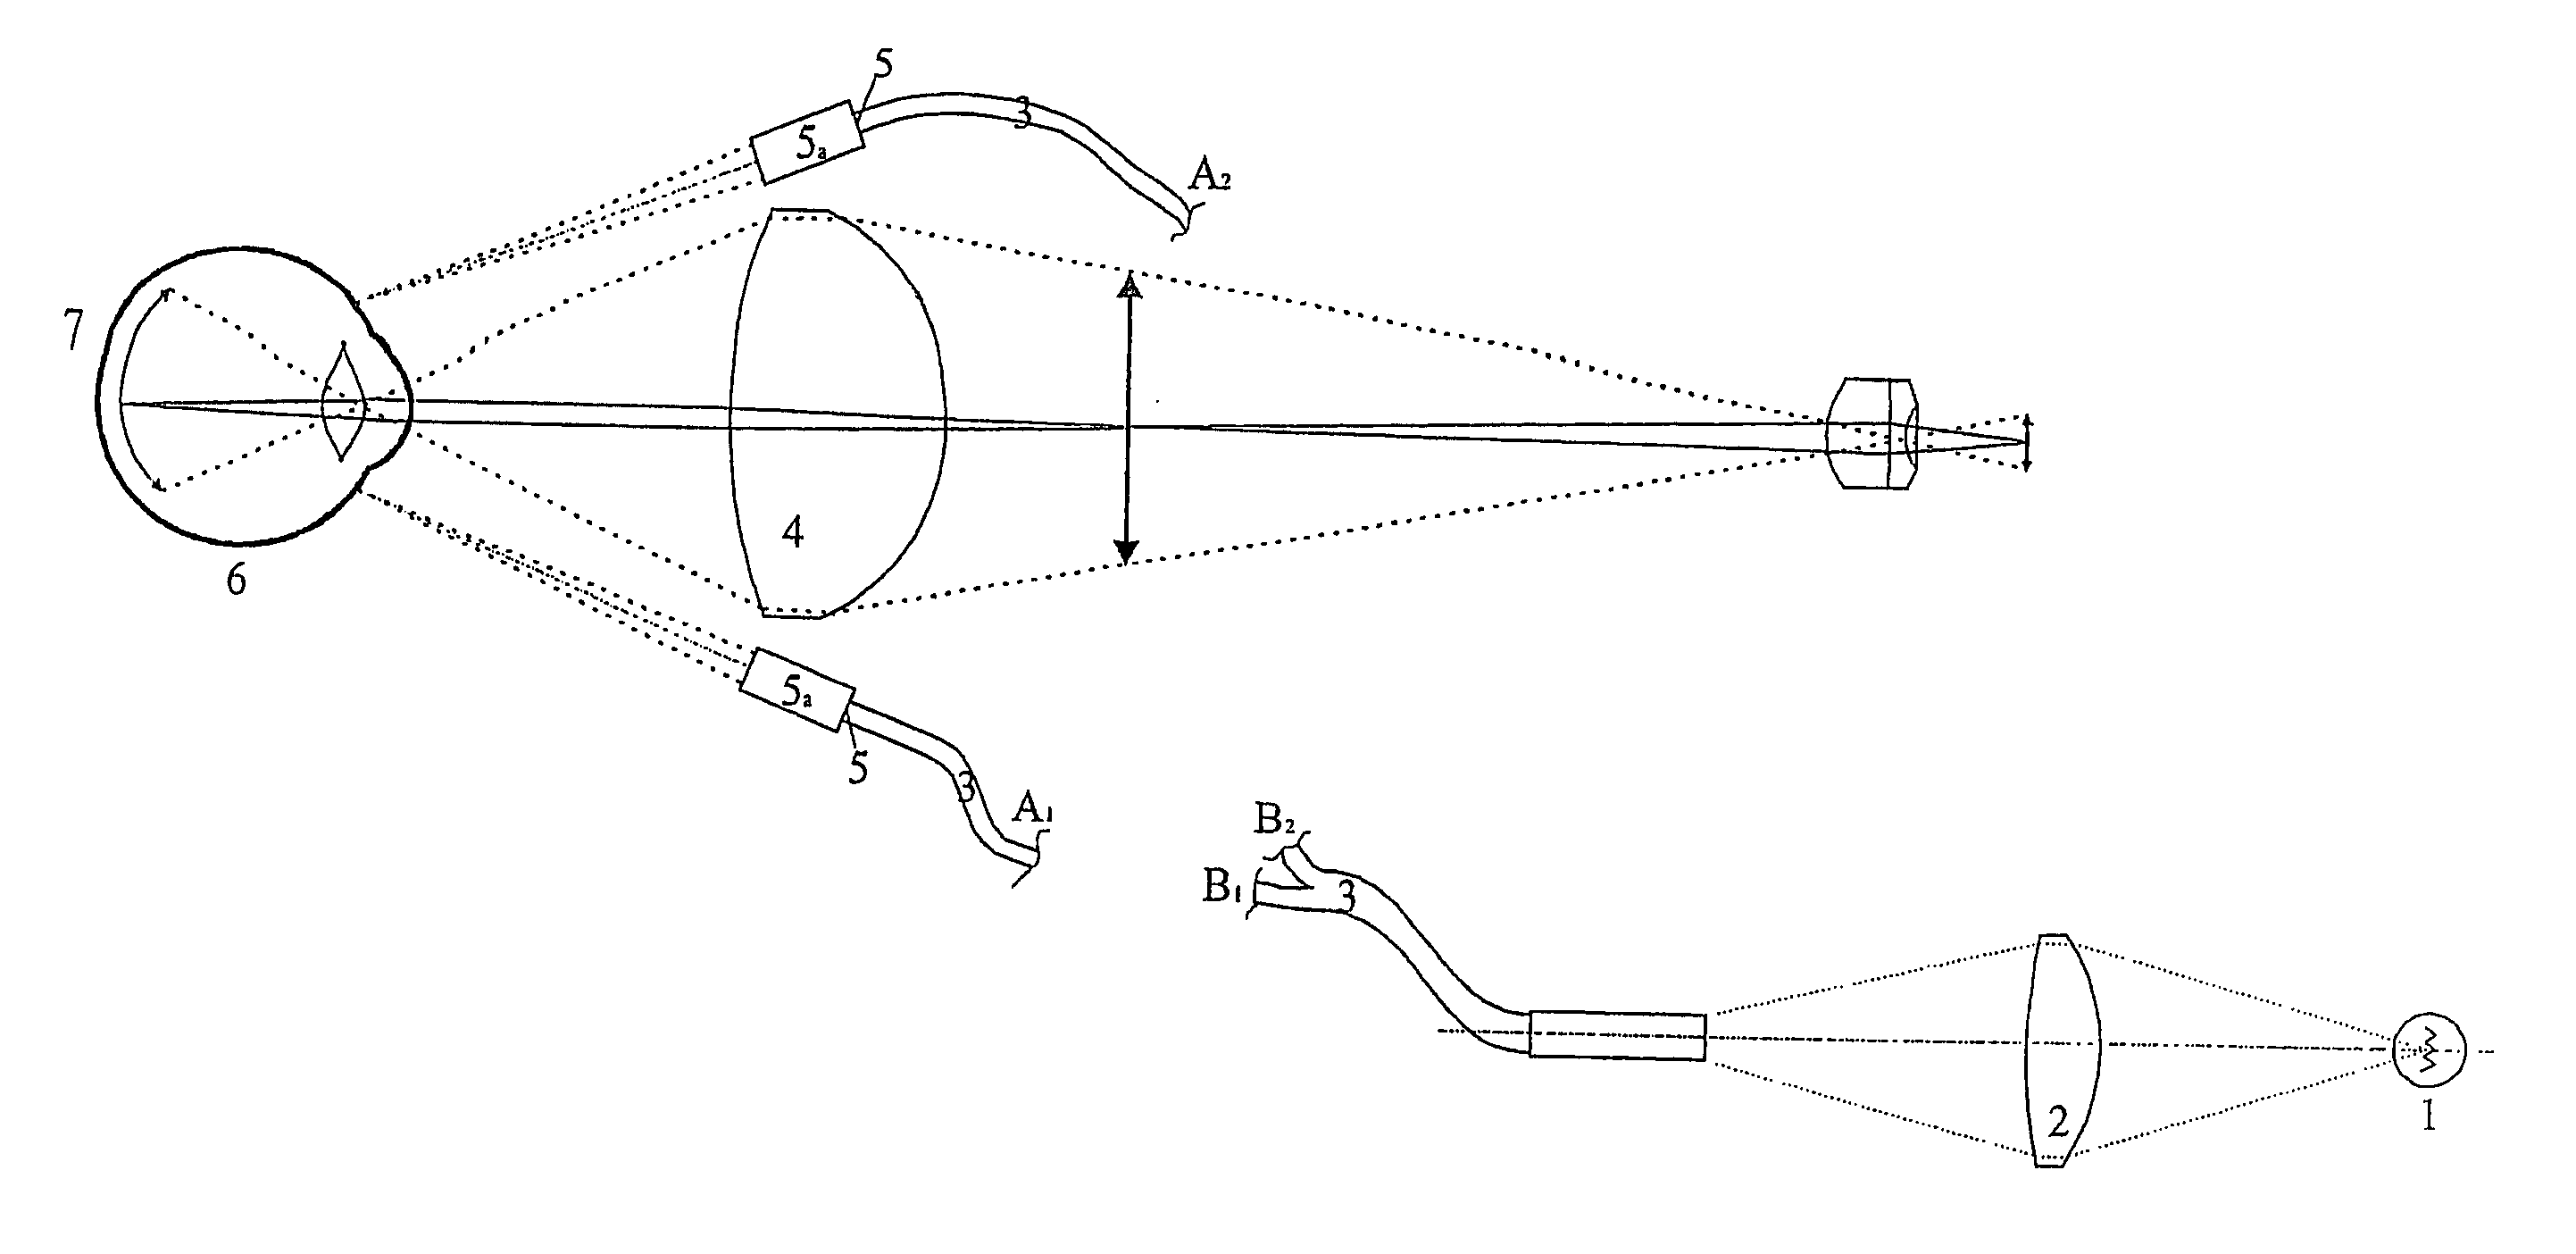 Illumination unit for fundus cameras and/or ophthalmoscopes